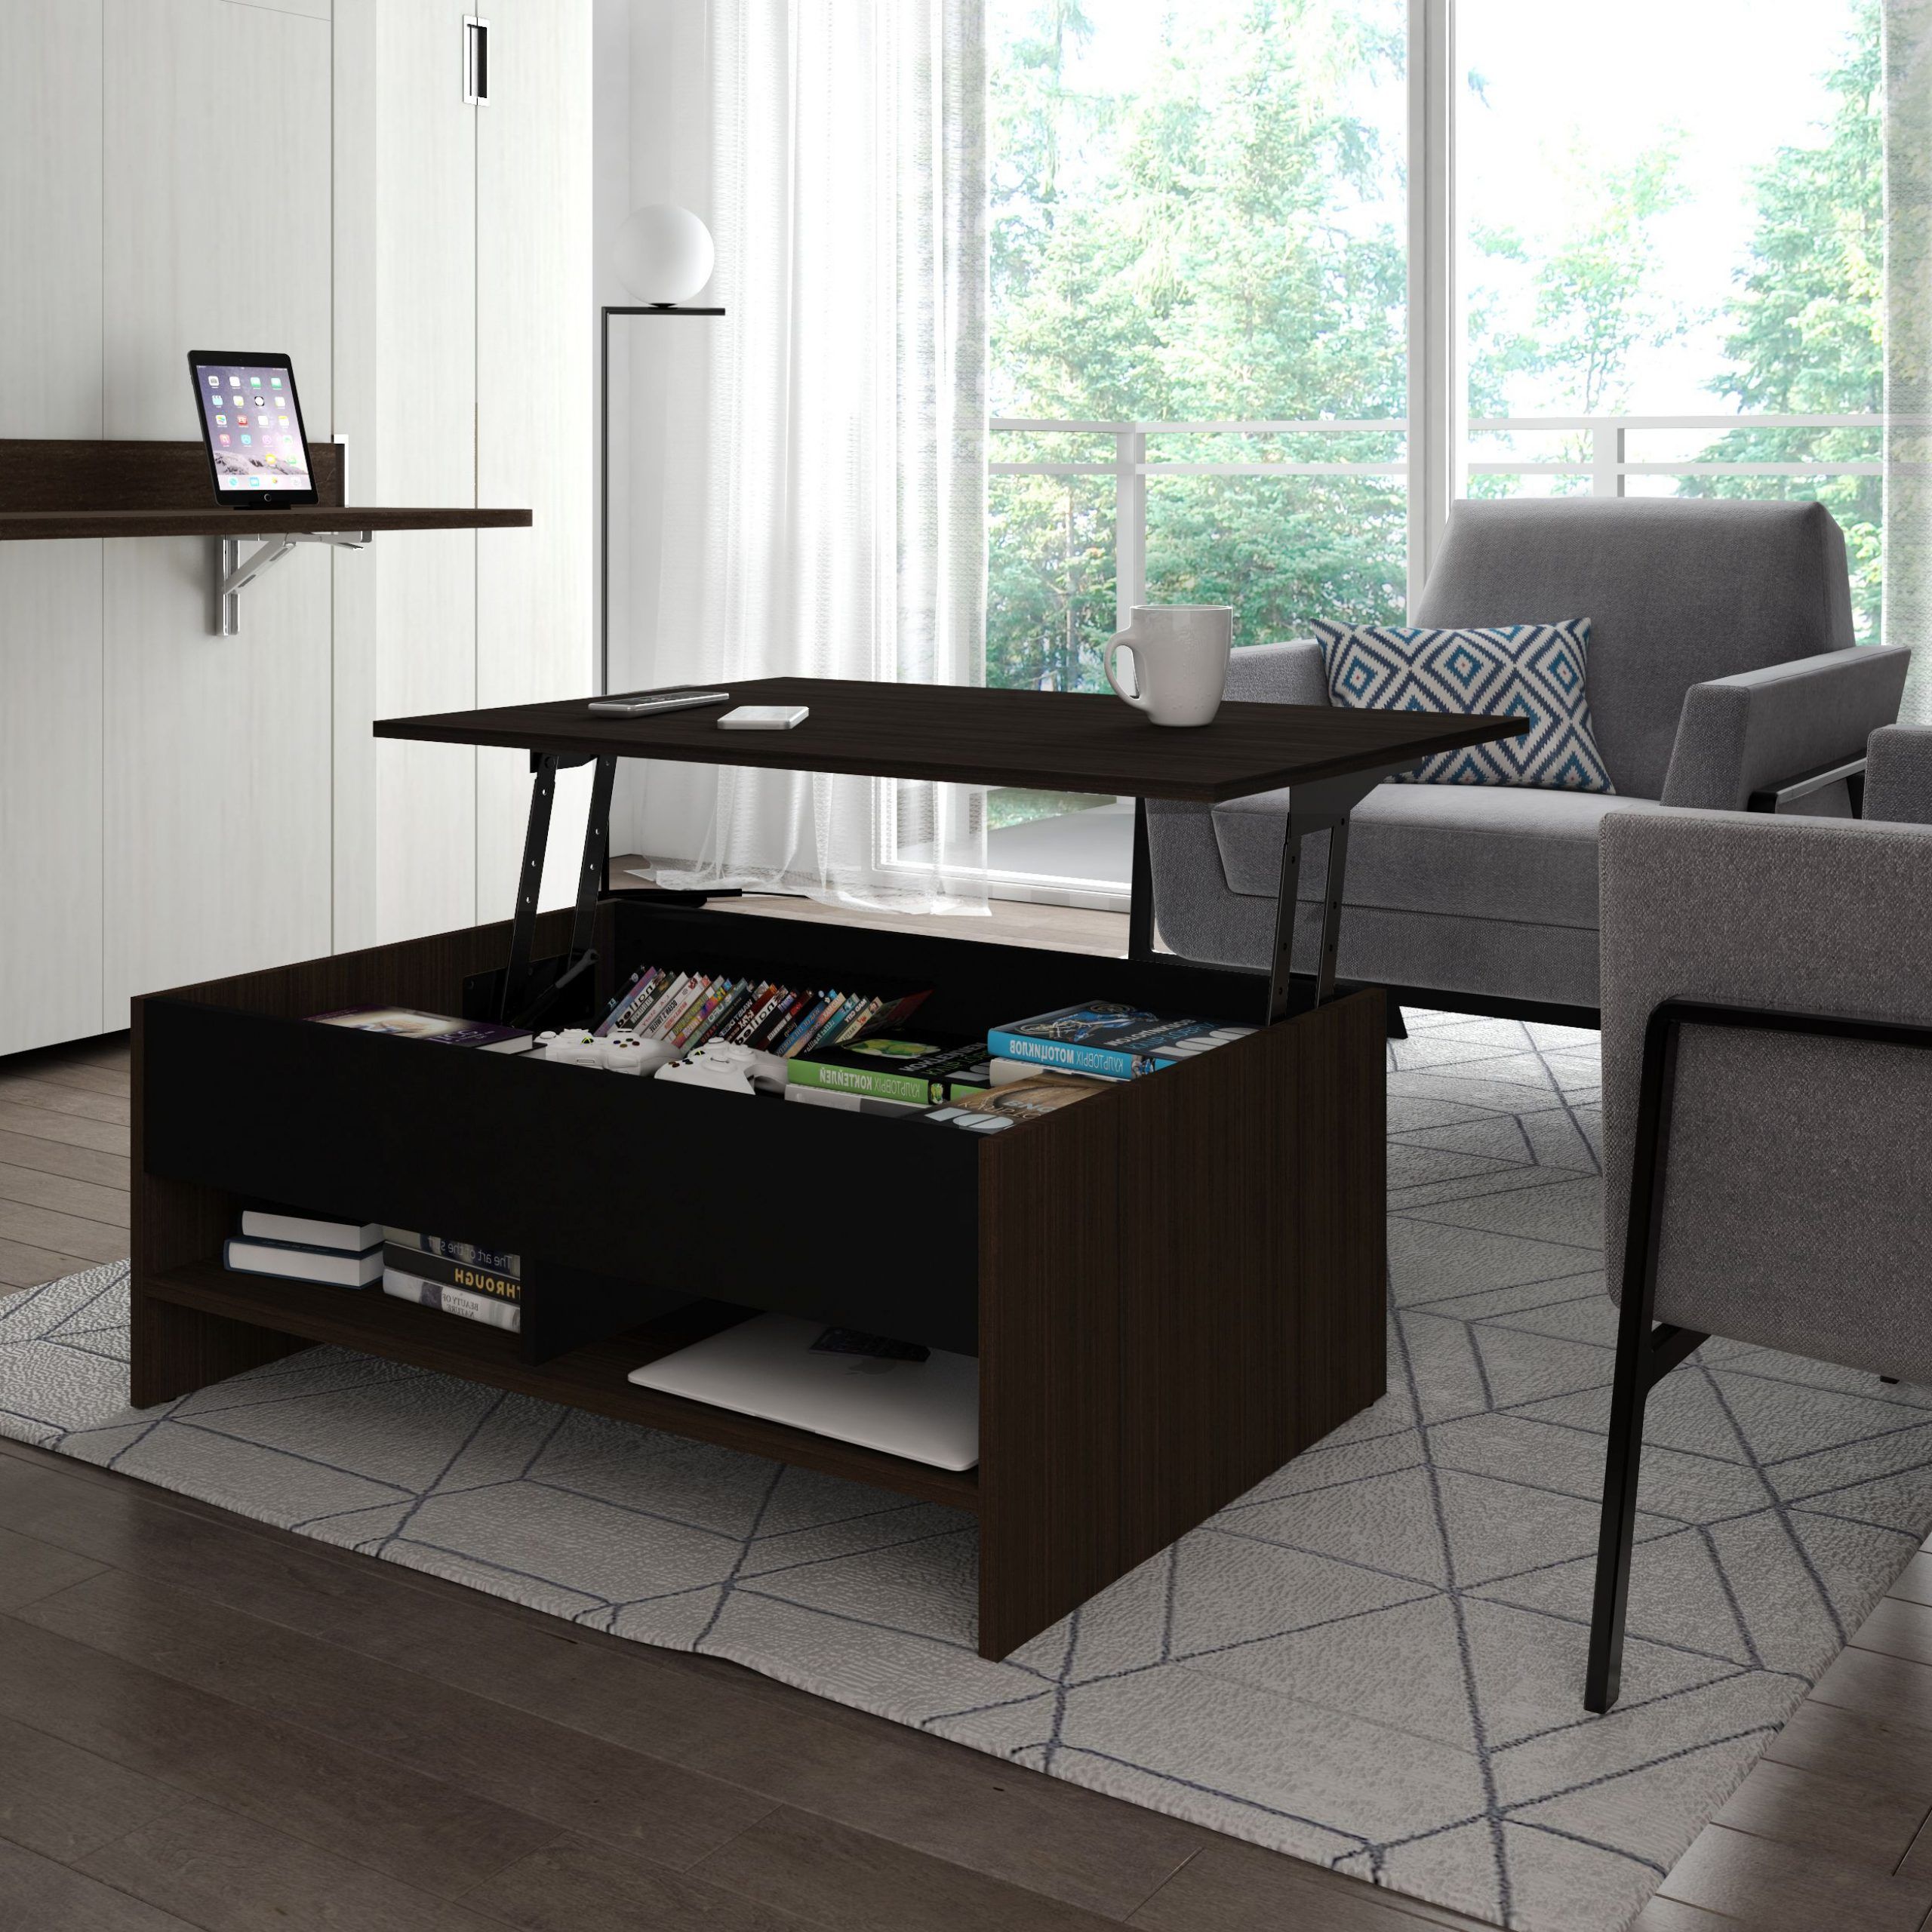 Bestar Small Space 37 Inch Lift Top Storage Coffee Table Regarding Latest Black Wood Storage Coffee Tables (Gallery 19 of 20)